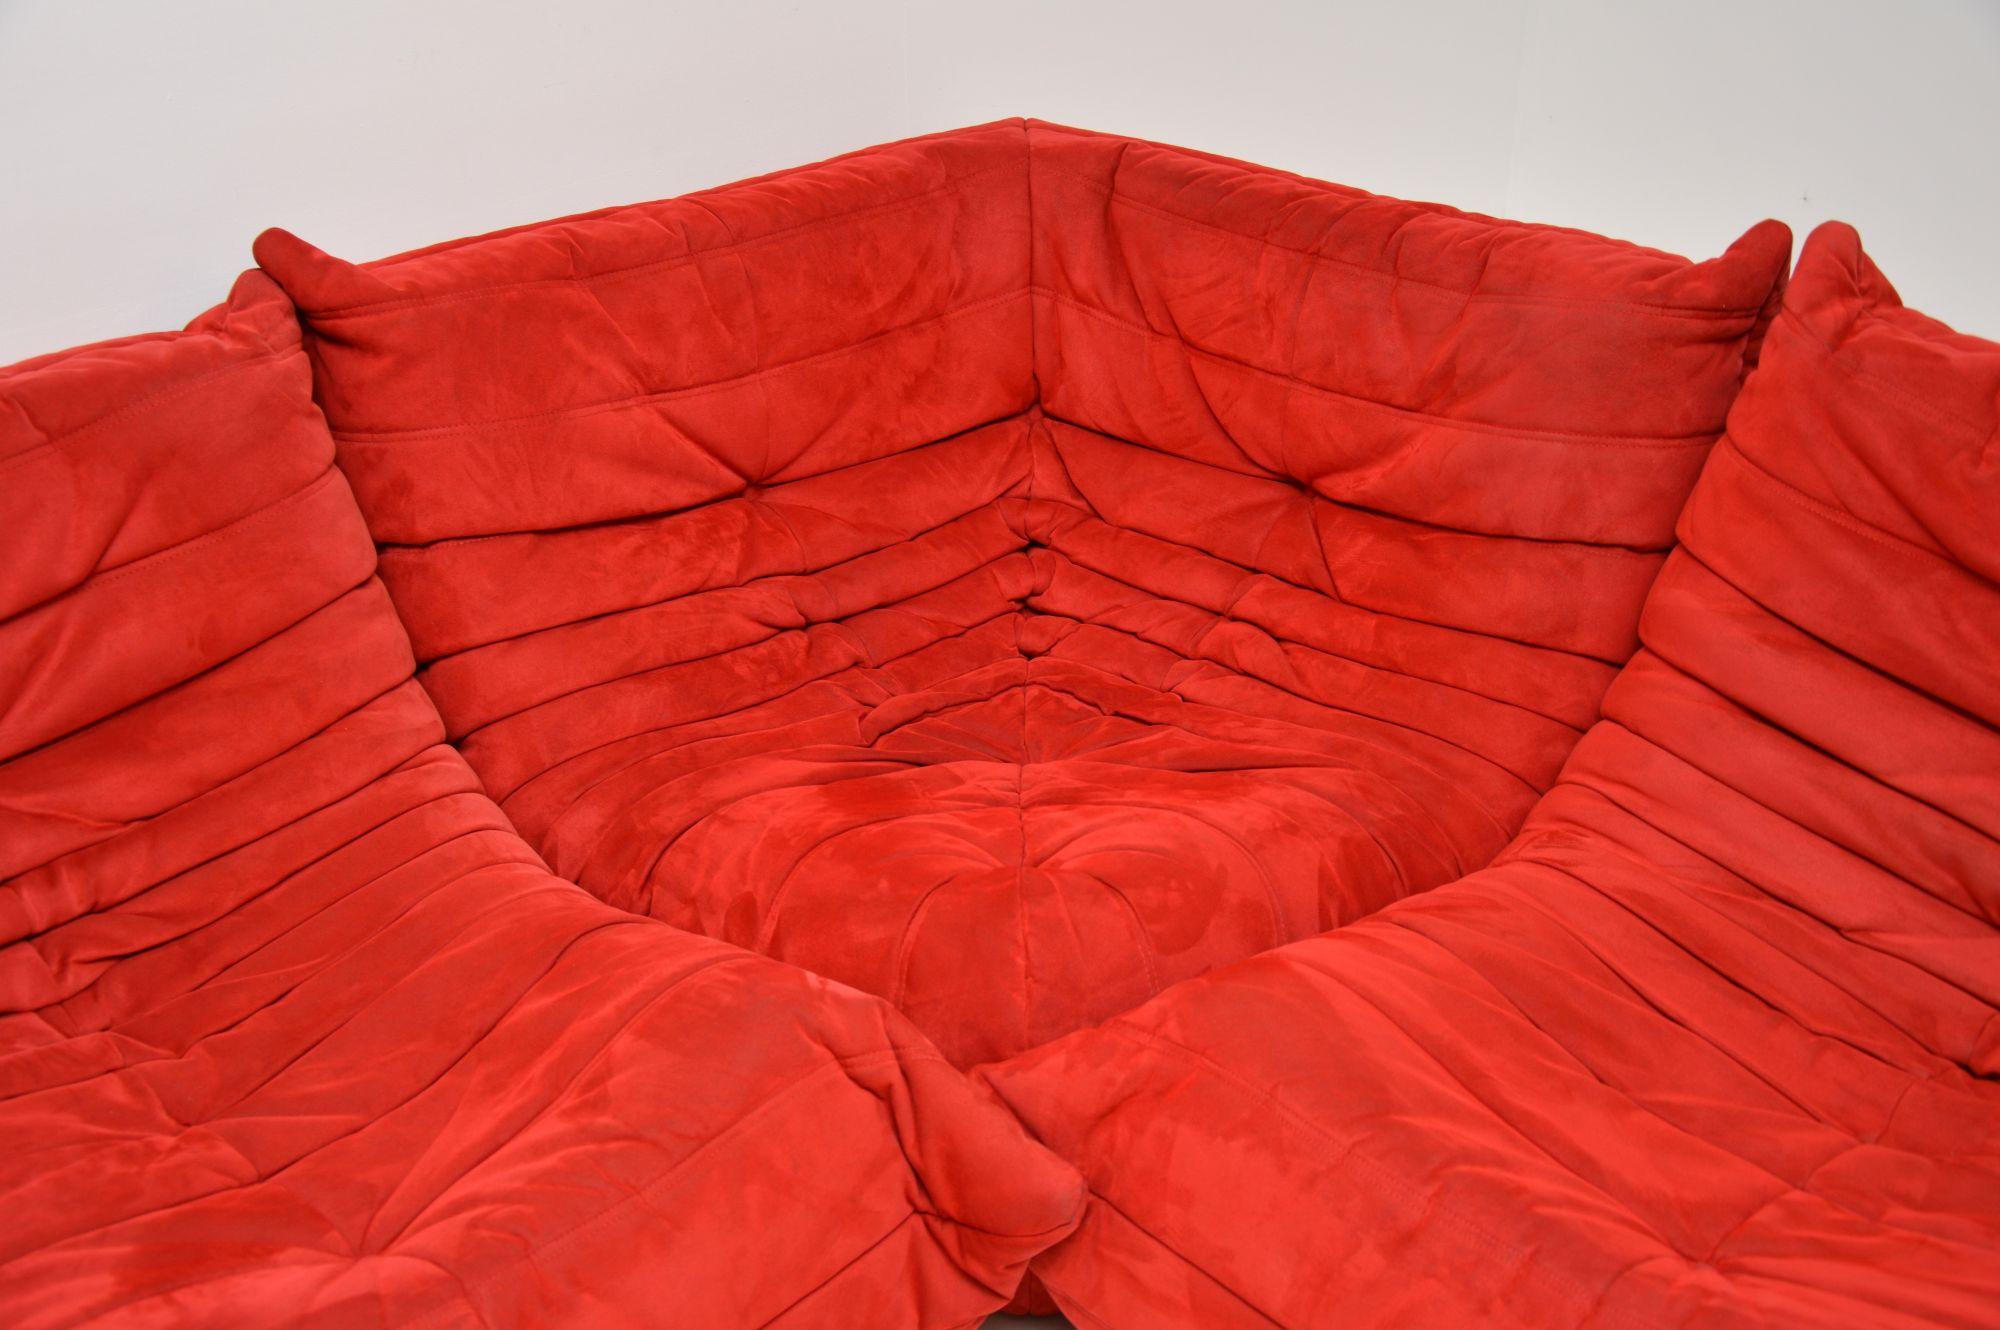 French Ligne Roset Togo Sofa Suite by Michel Ducaroy